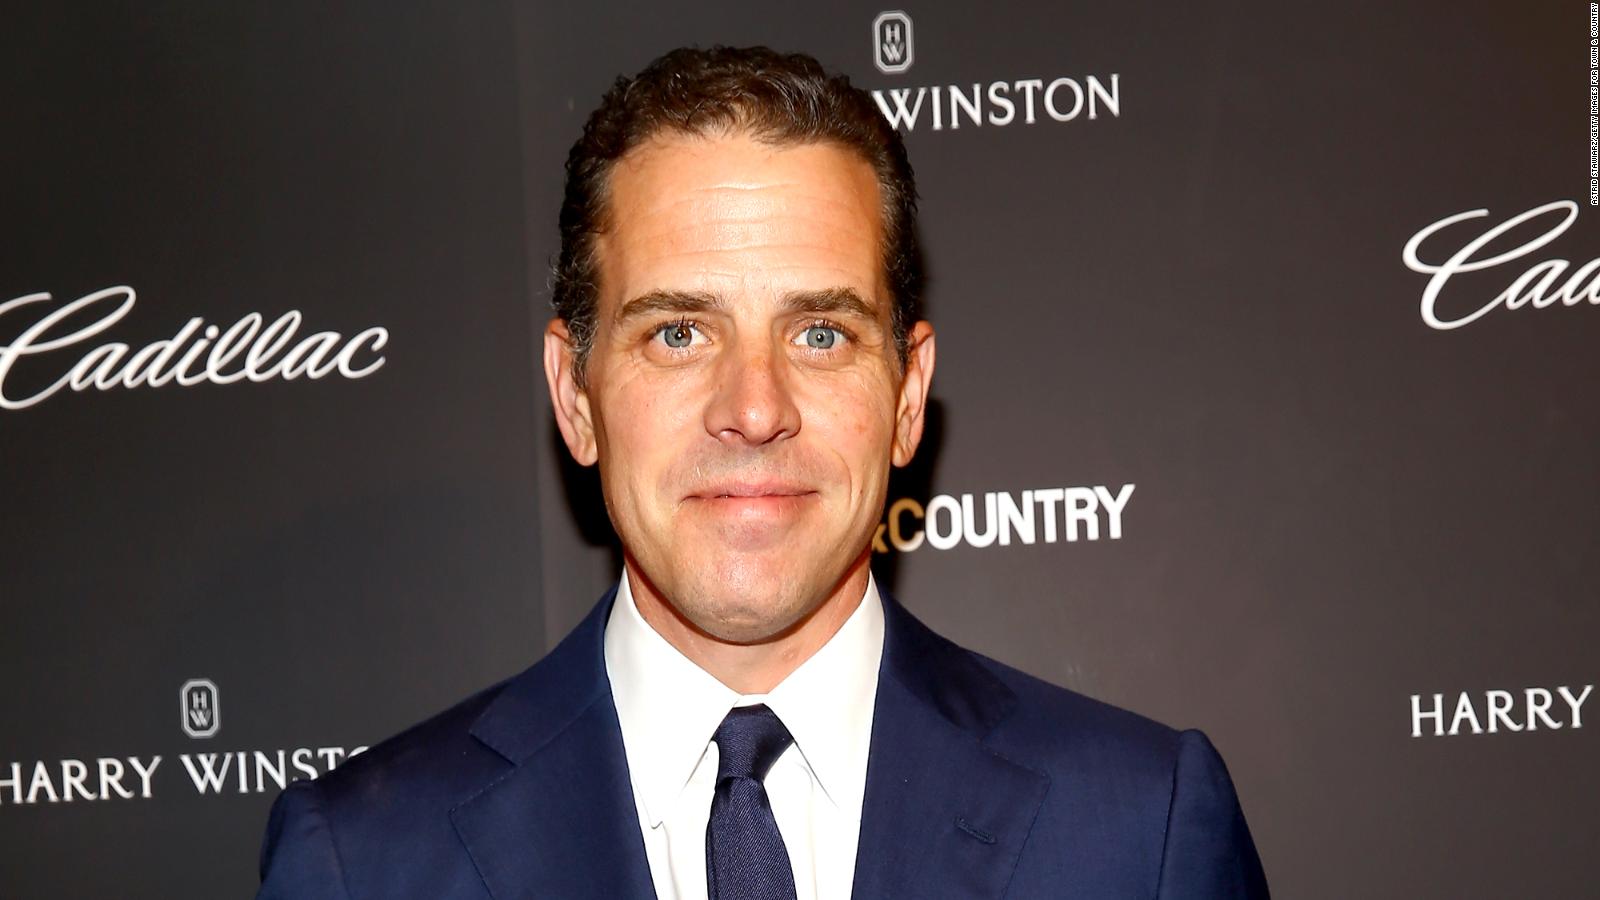 Hunter Biden agrees to pay child support in paternity case settlement